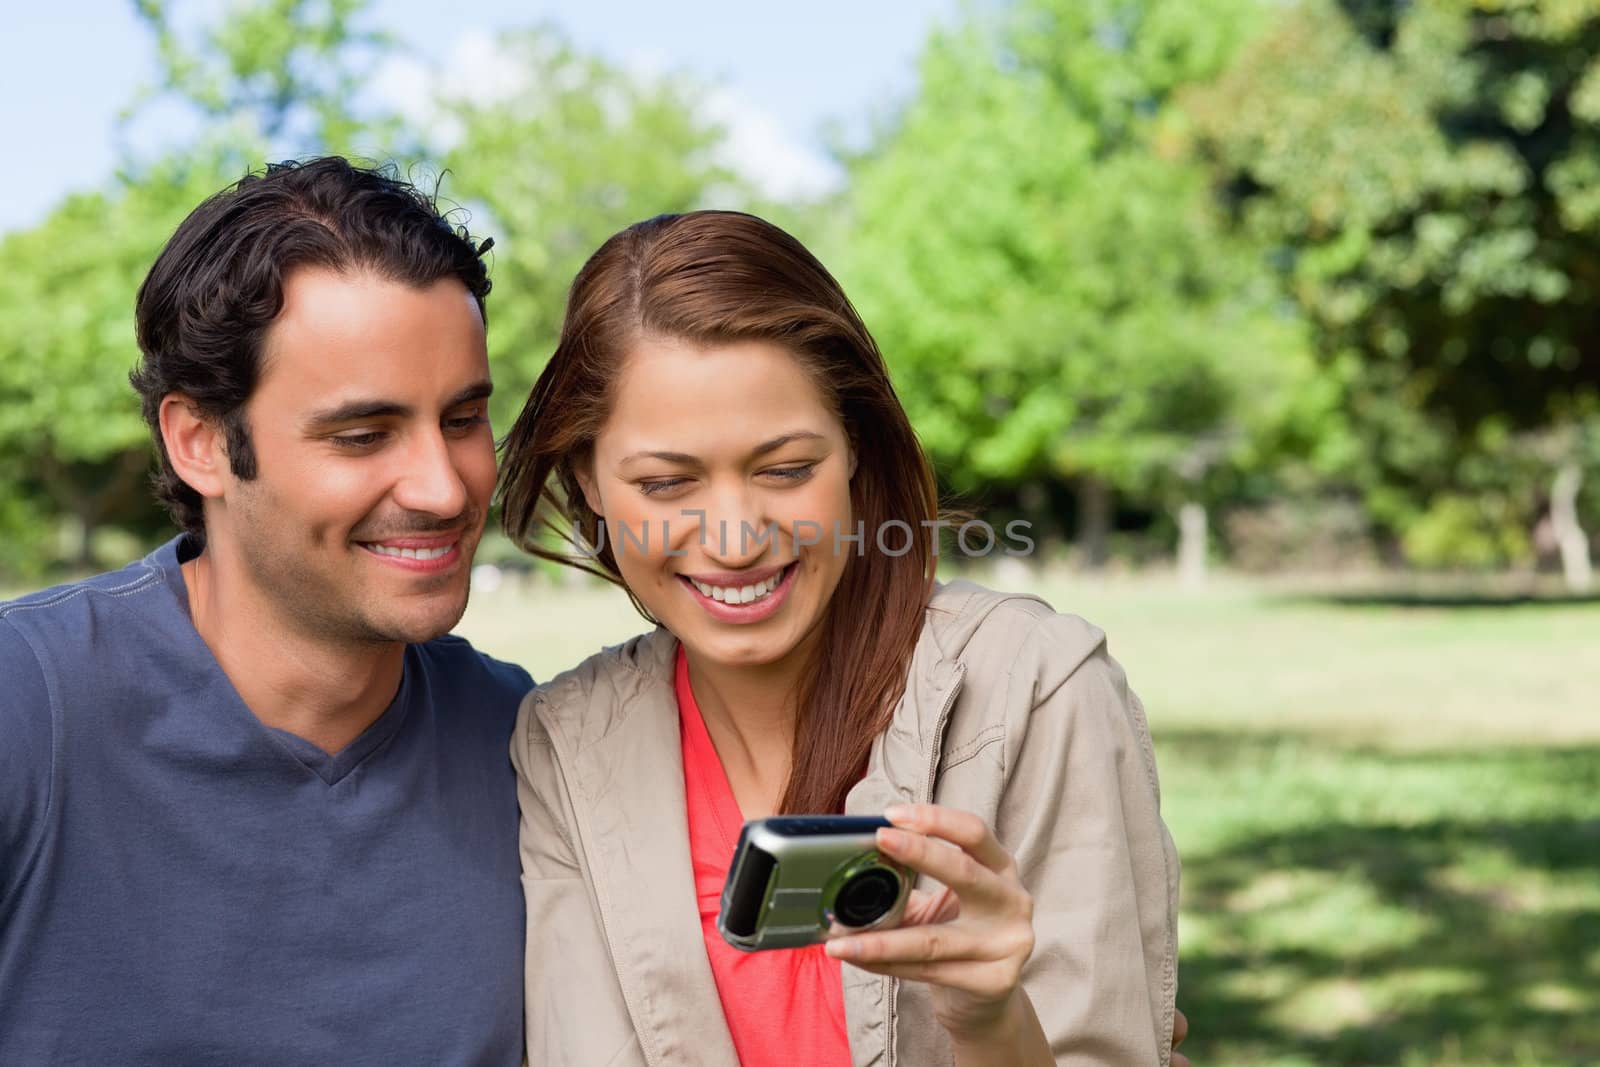 Woman and her friend looking at pictures on a camera in a bright park